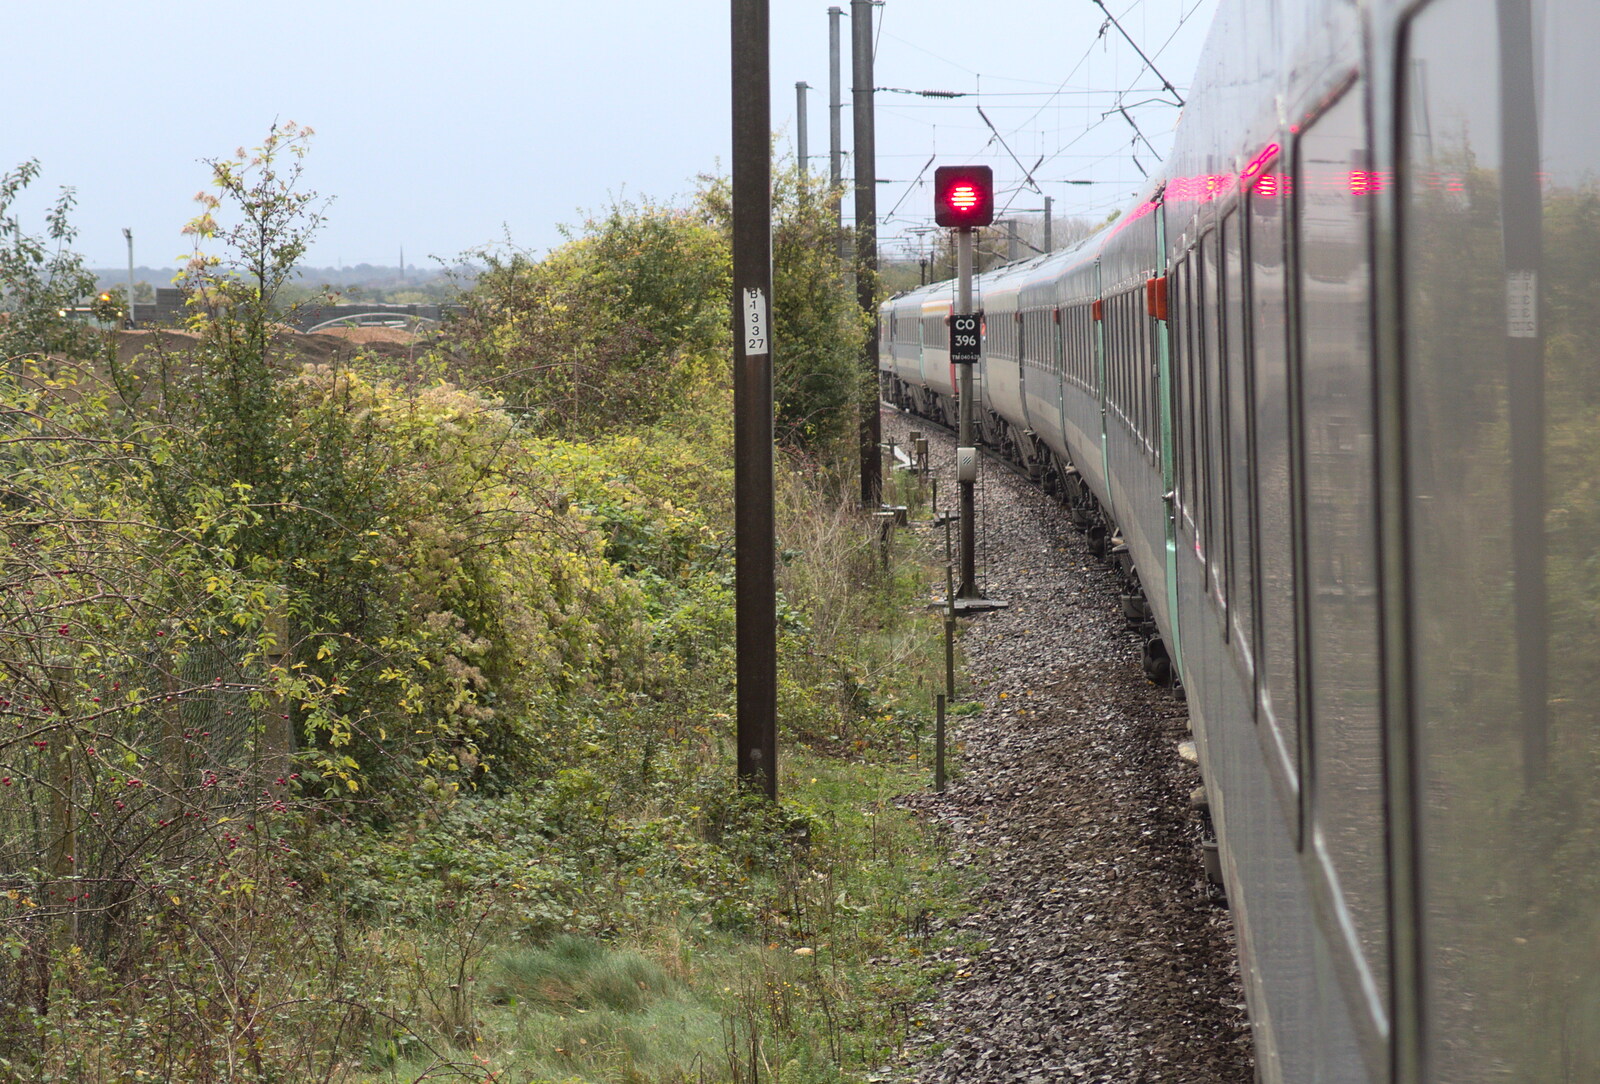 The train crawls off to Colchester from (Very) Long Train (Not) Running, Stowmarket, Suffolk - 21st October 2014